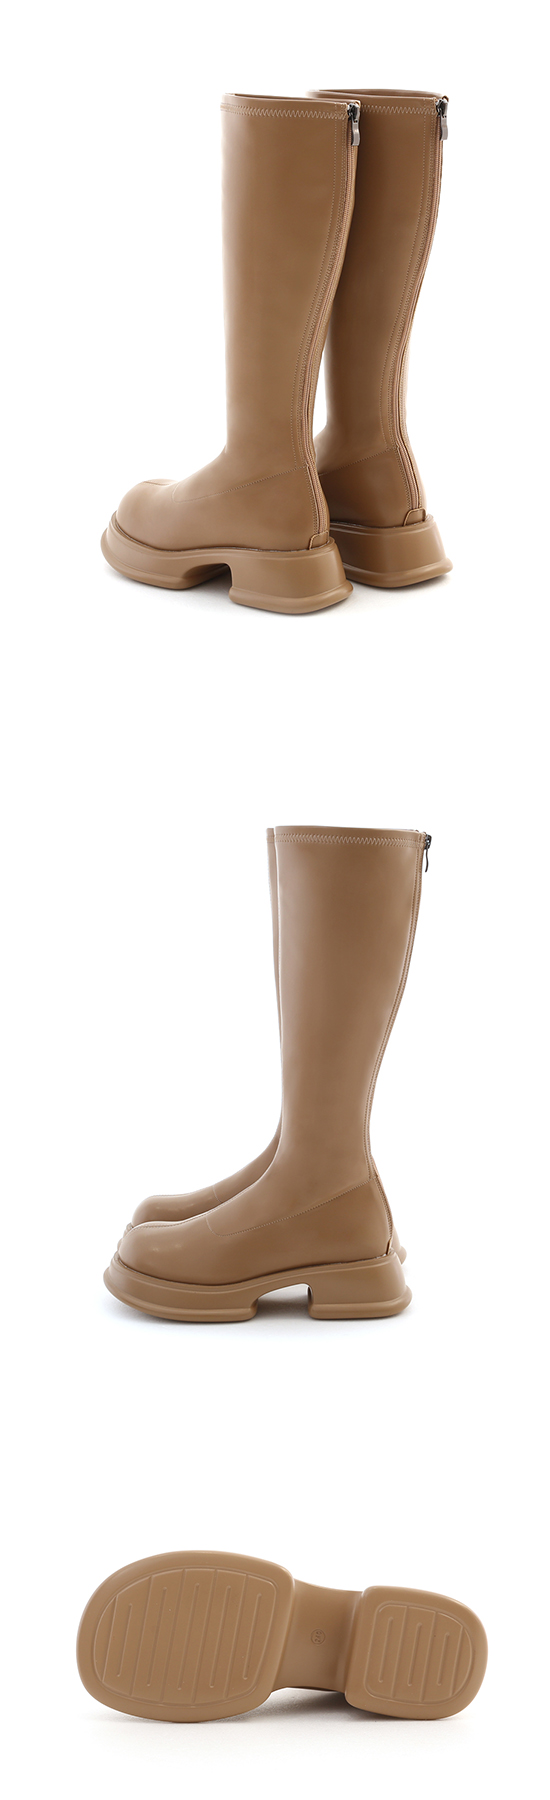 Plain Lightweight Thick Sole Slimming Tall Boots Beige